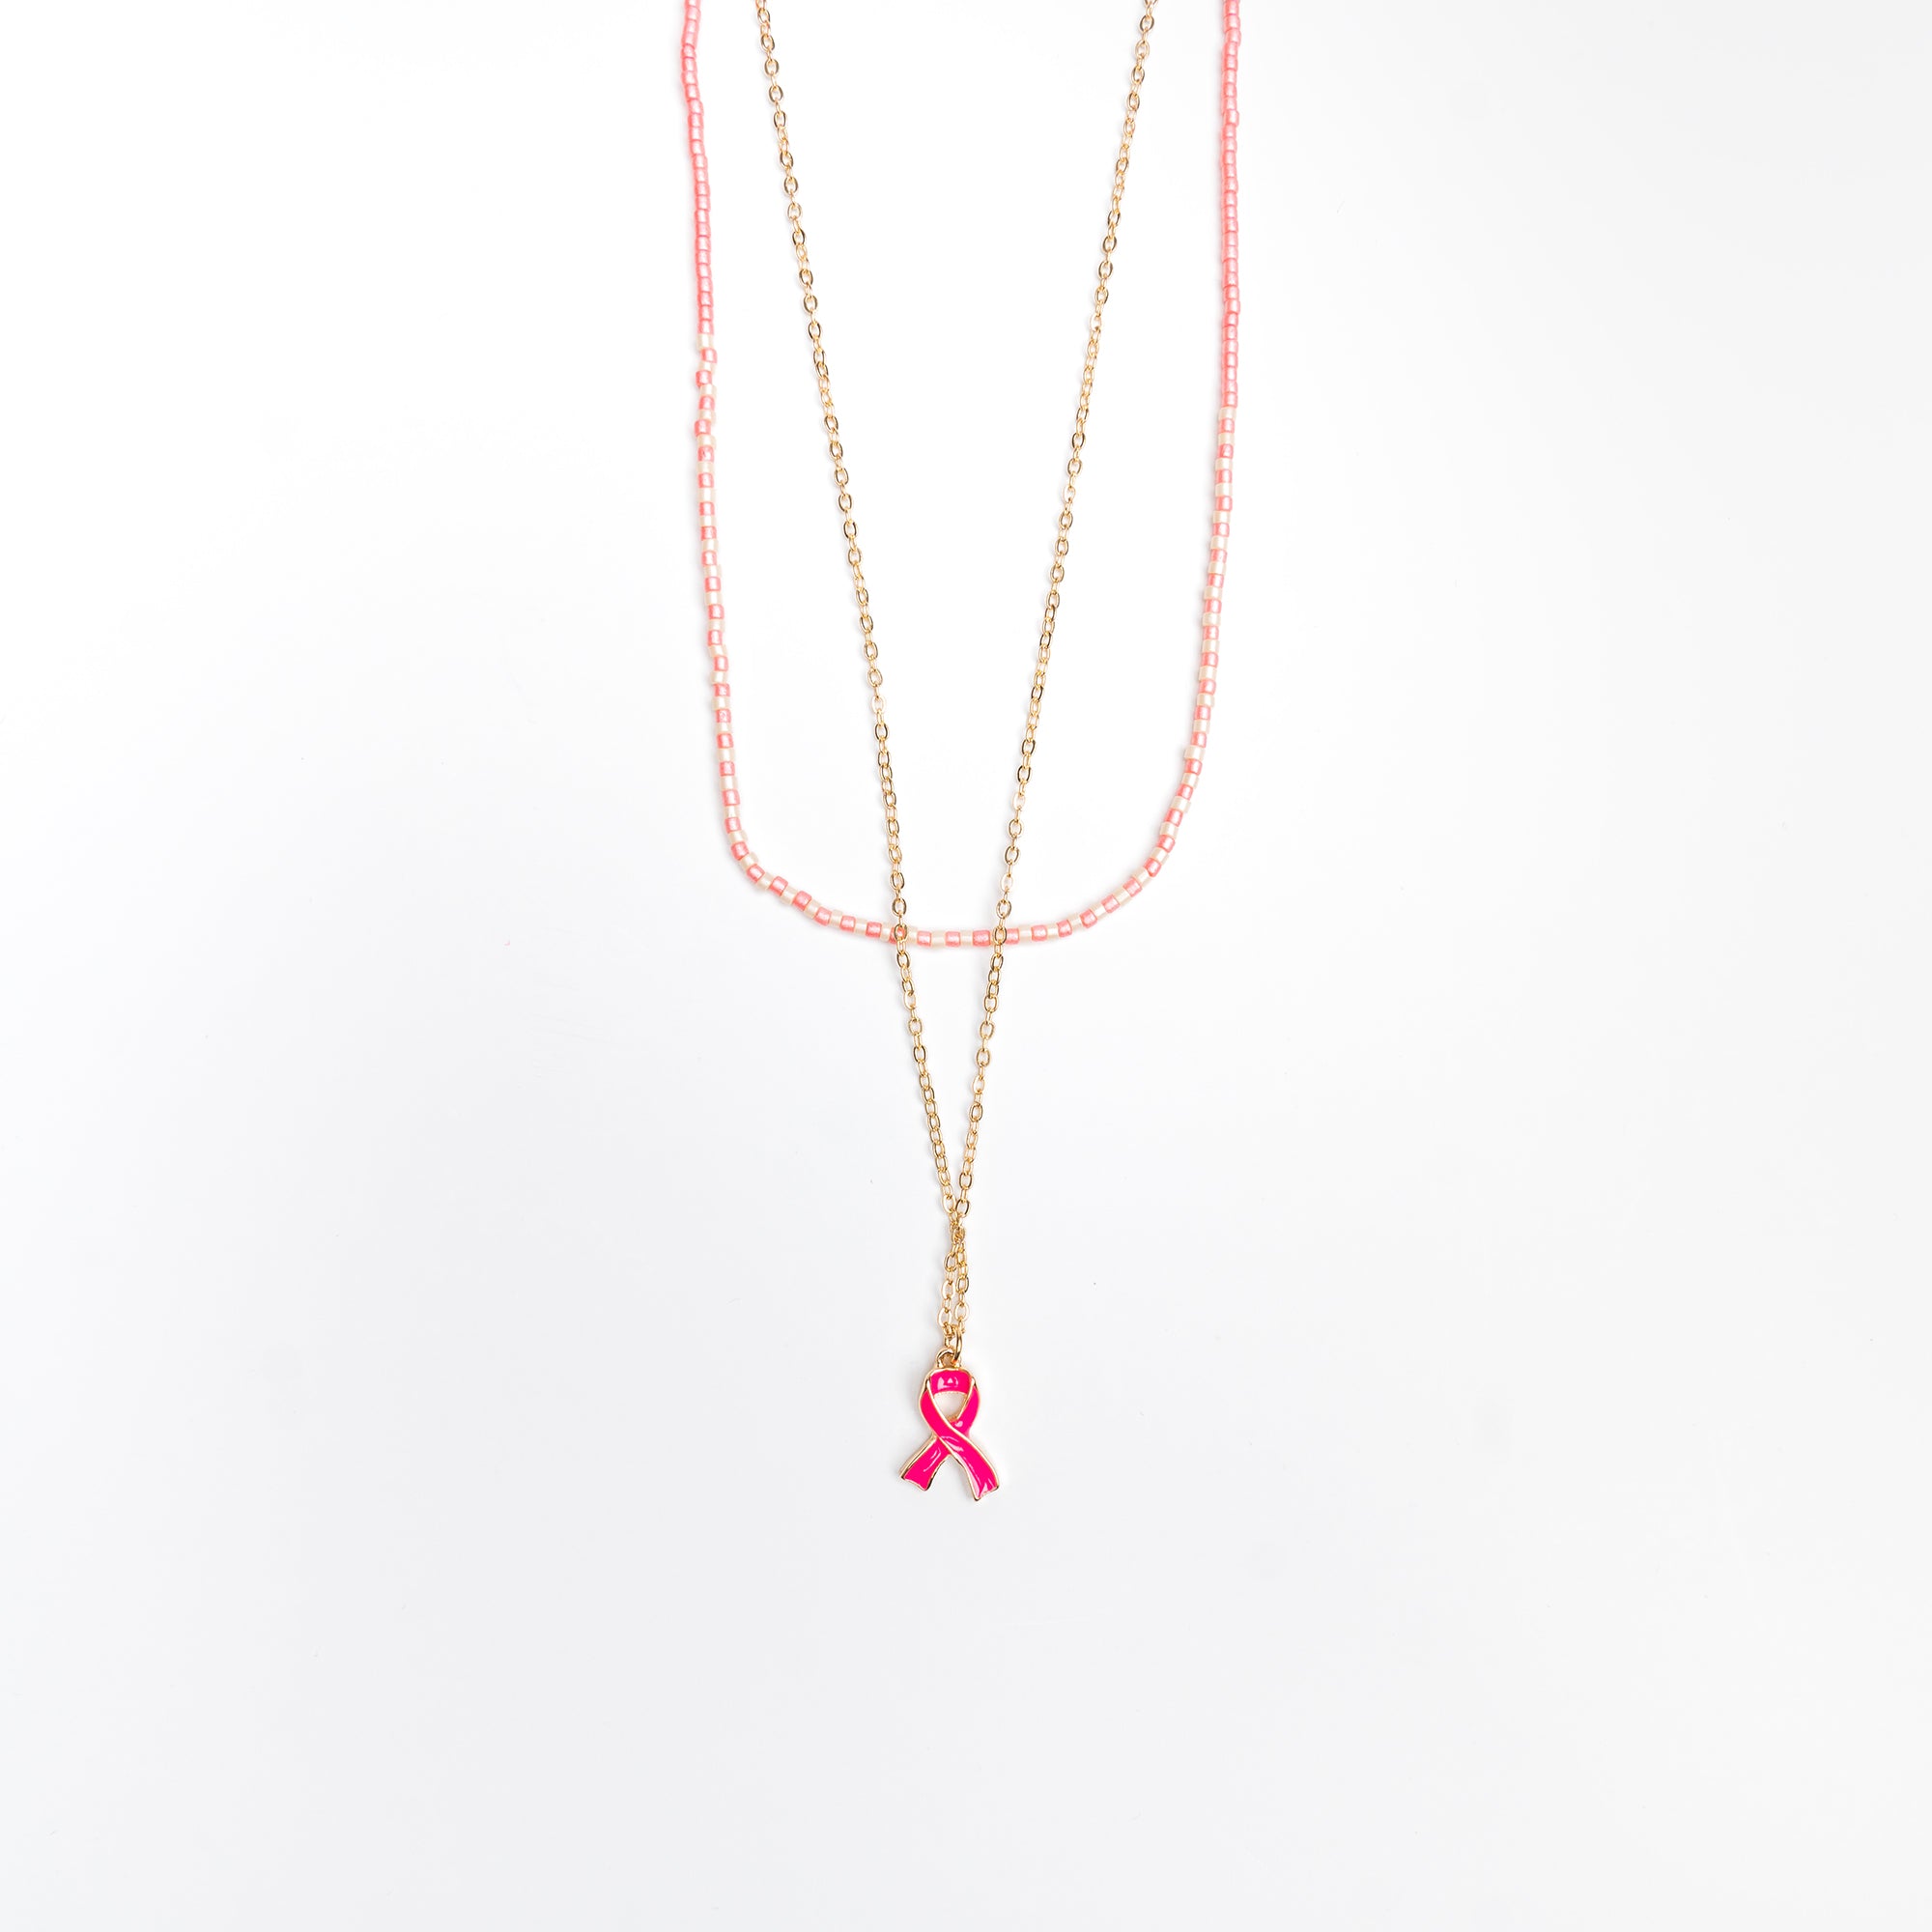 100 Pieces Breast Cancer Awareness Charm Pink Ribbon Pendant Charm Jewelry  DIY Accessories for Necklace Bracelet Making Crafts : Amazon.in: Home &  Kitchen